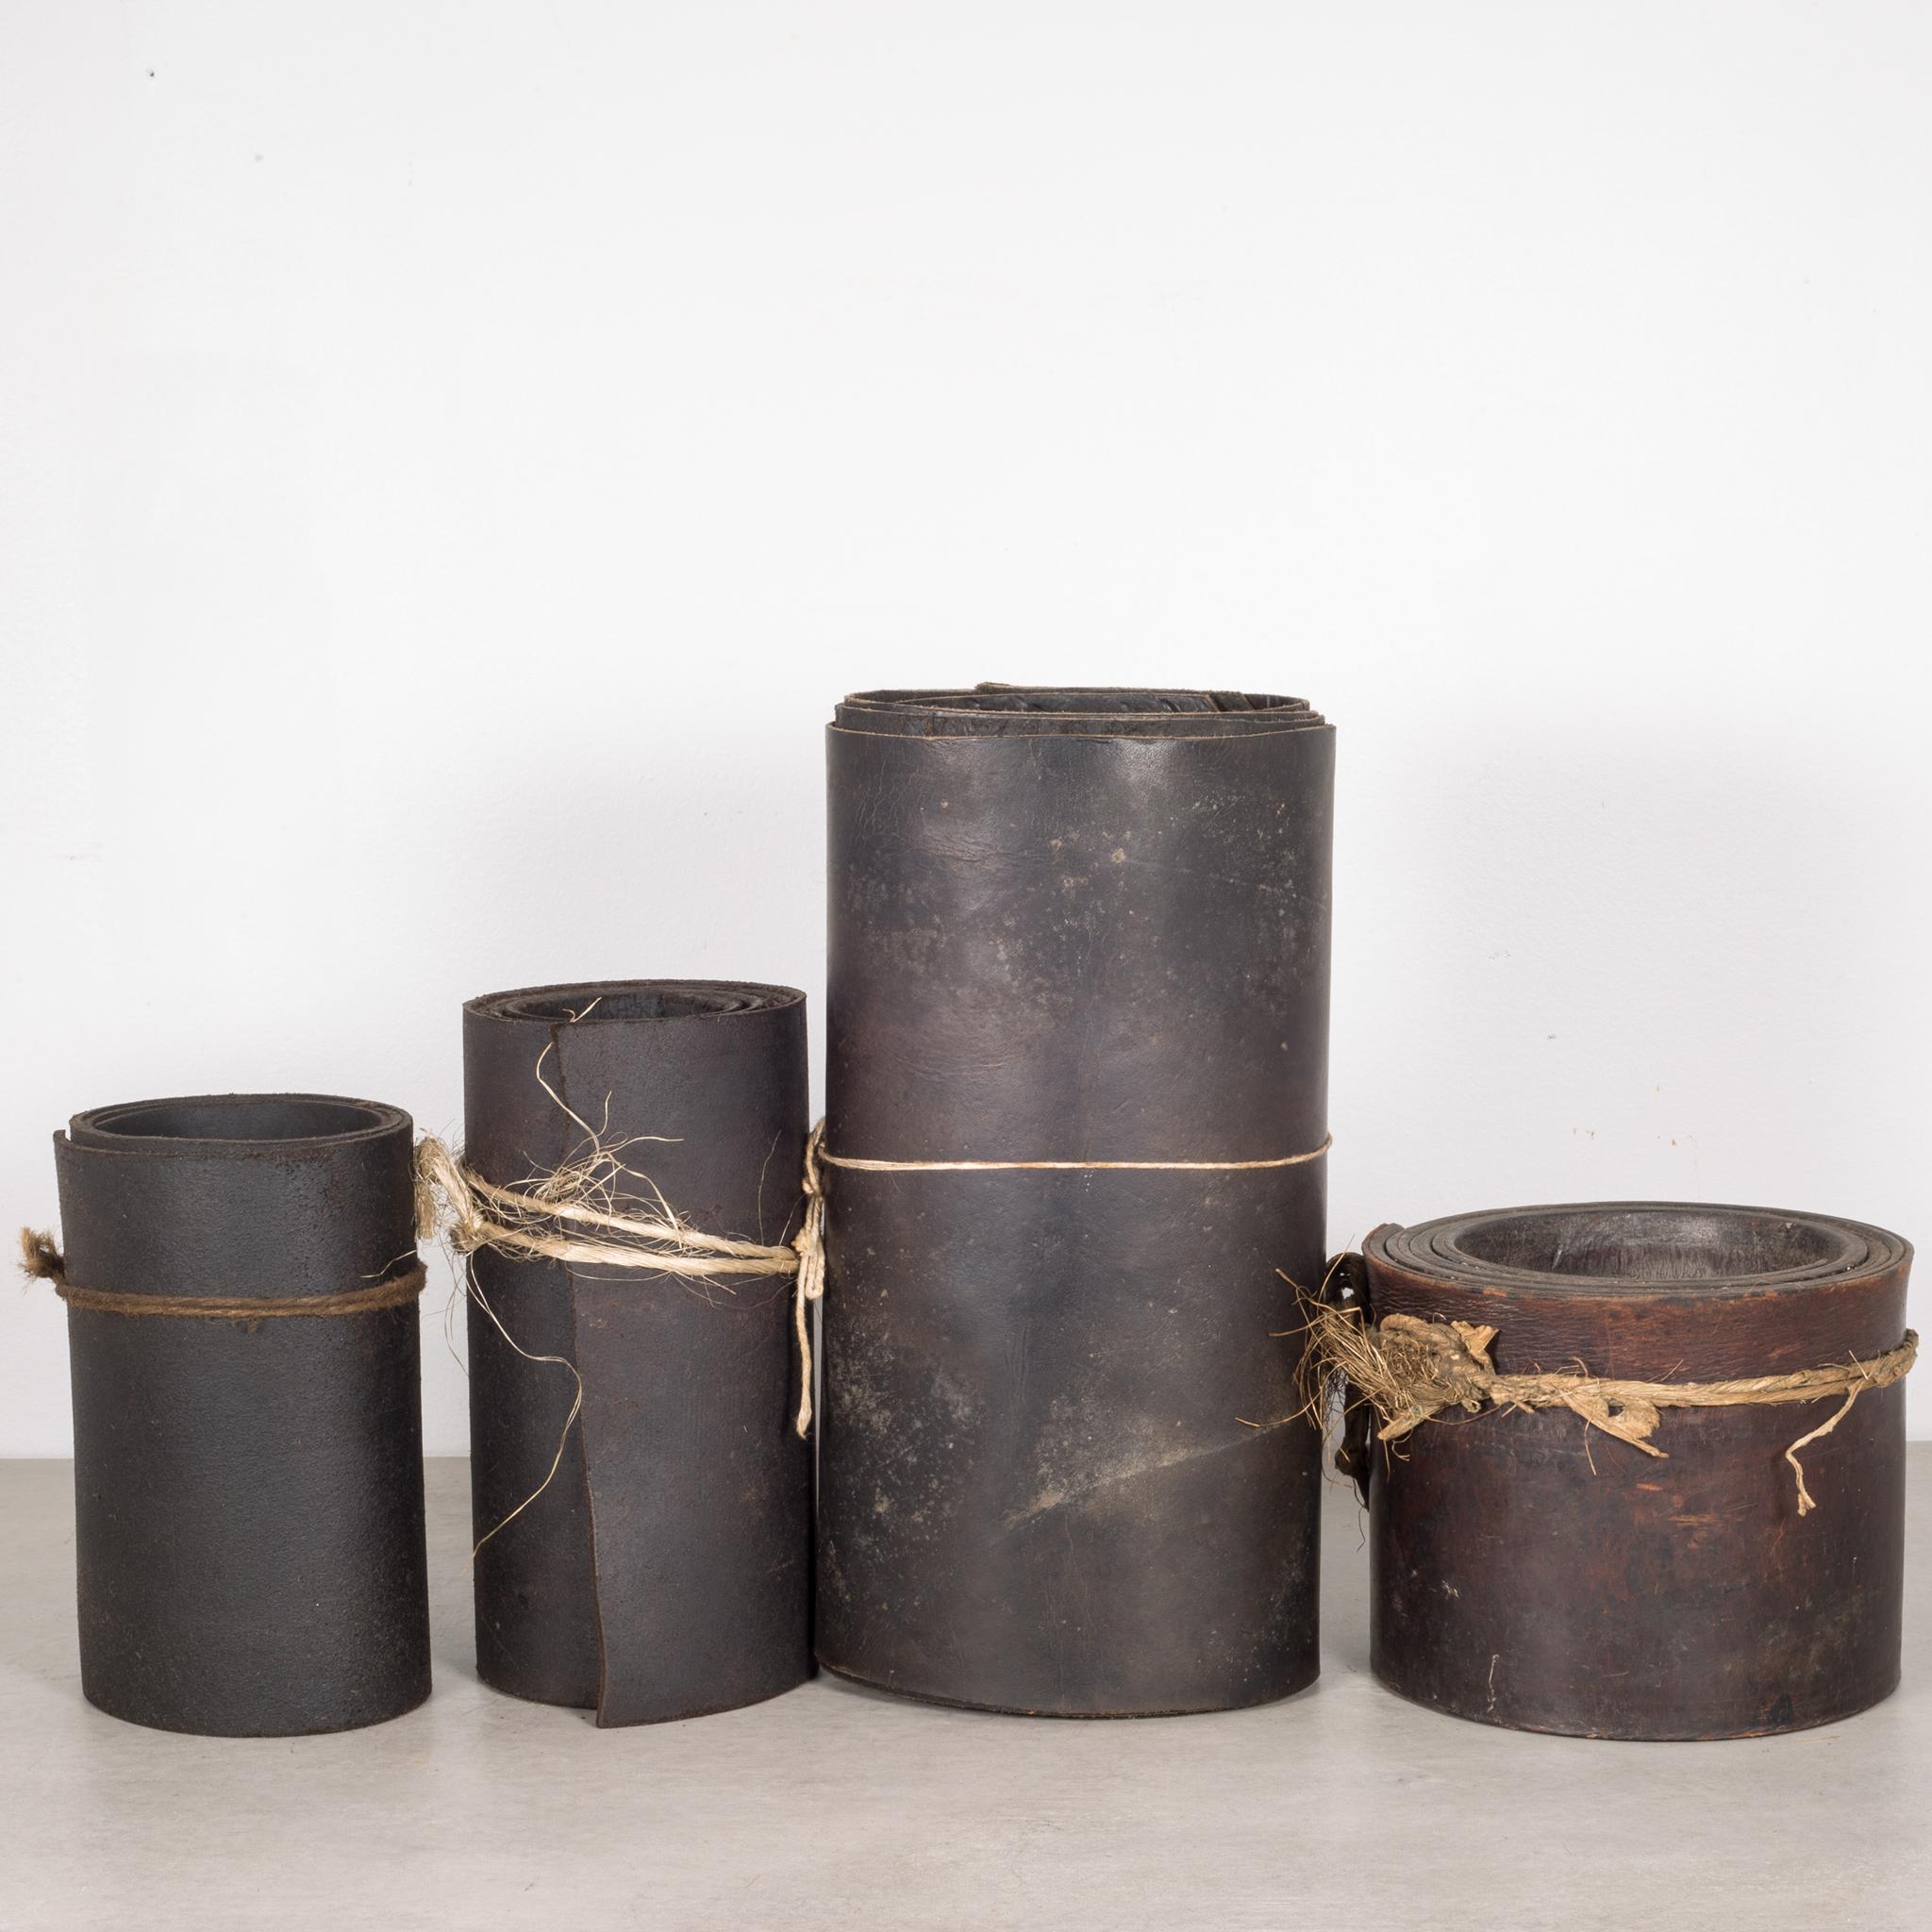 The roll on the far right has sold. There are now 3 rolls. 

About

A collection of vintage rolls of leather from a cobbler shop used to make shoes. Each is a different type and thickness of leather and the color and textures vary. The leather has